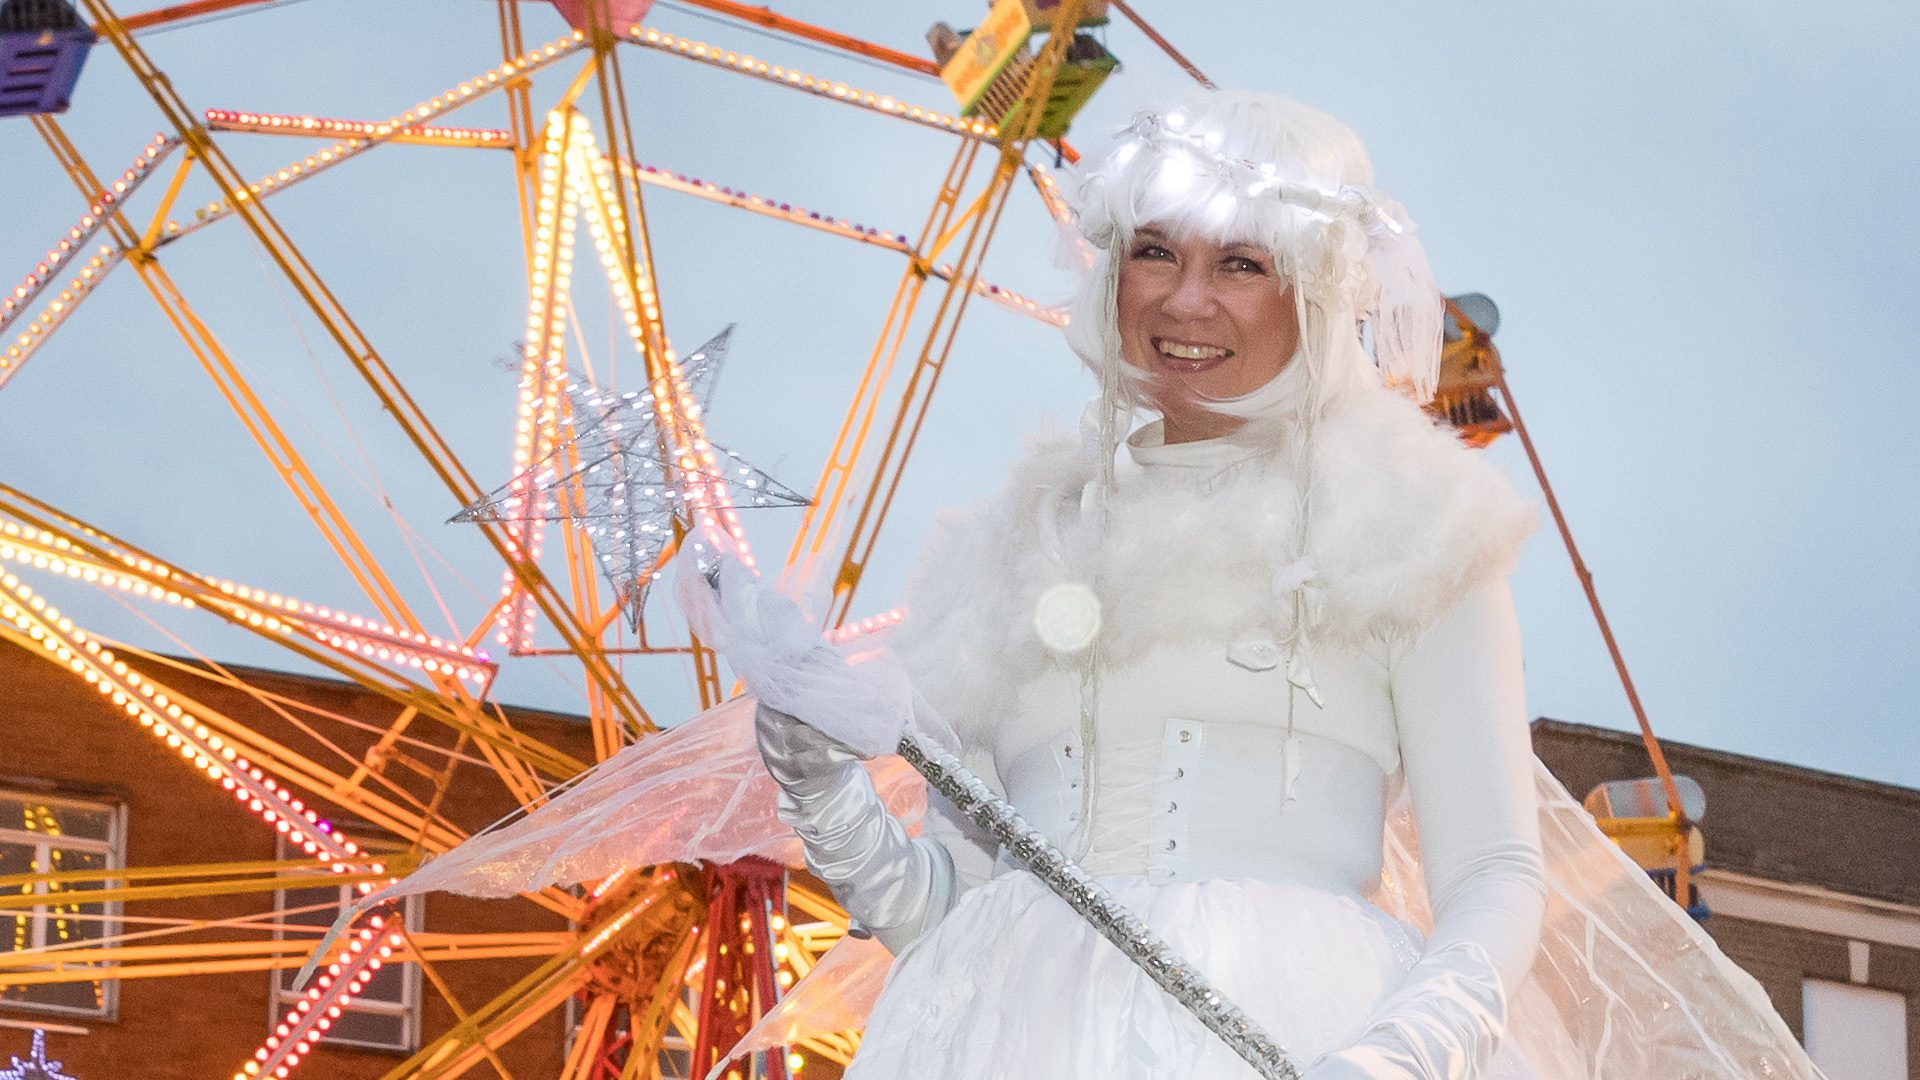 A lady dressed in white sparkly clothes and a white wig stands on stilts in front of the Ferris wheel